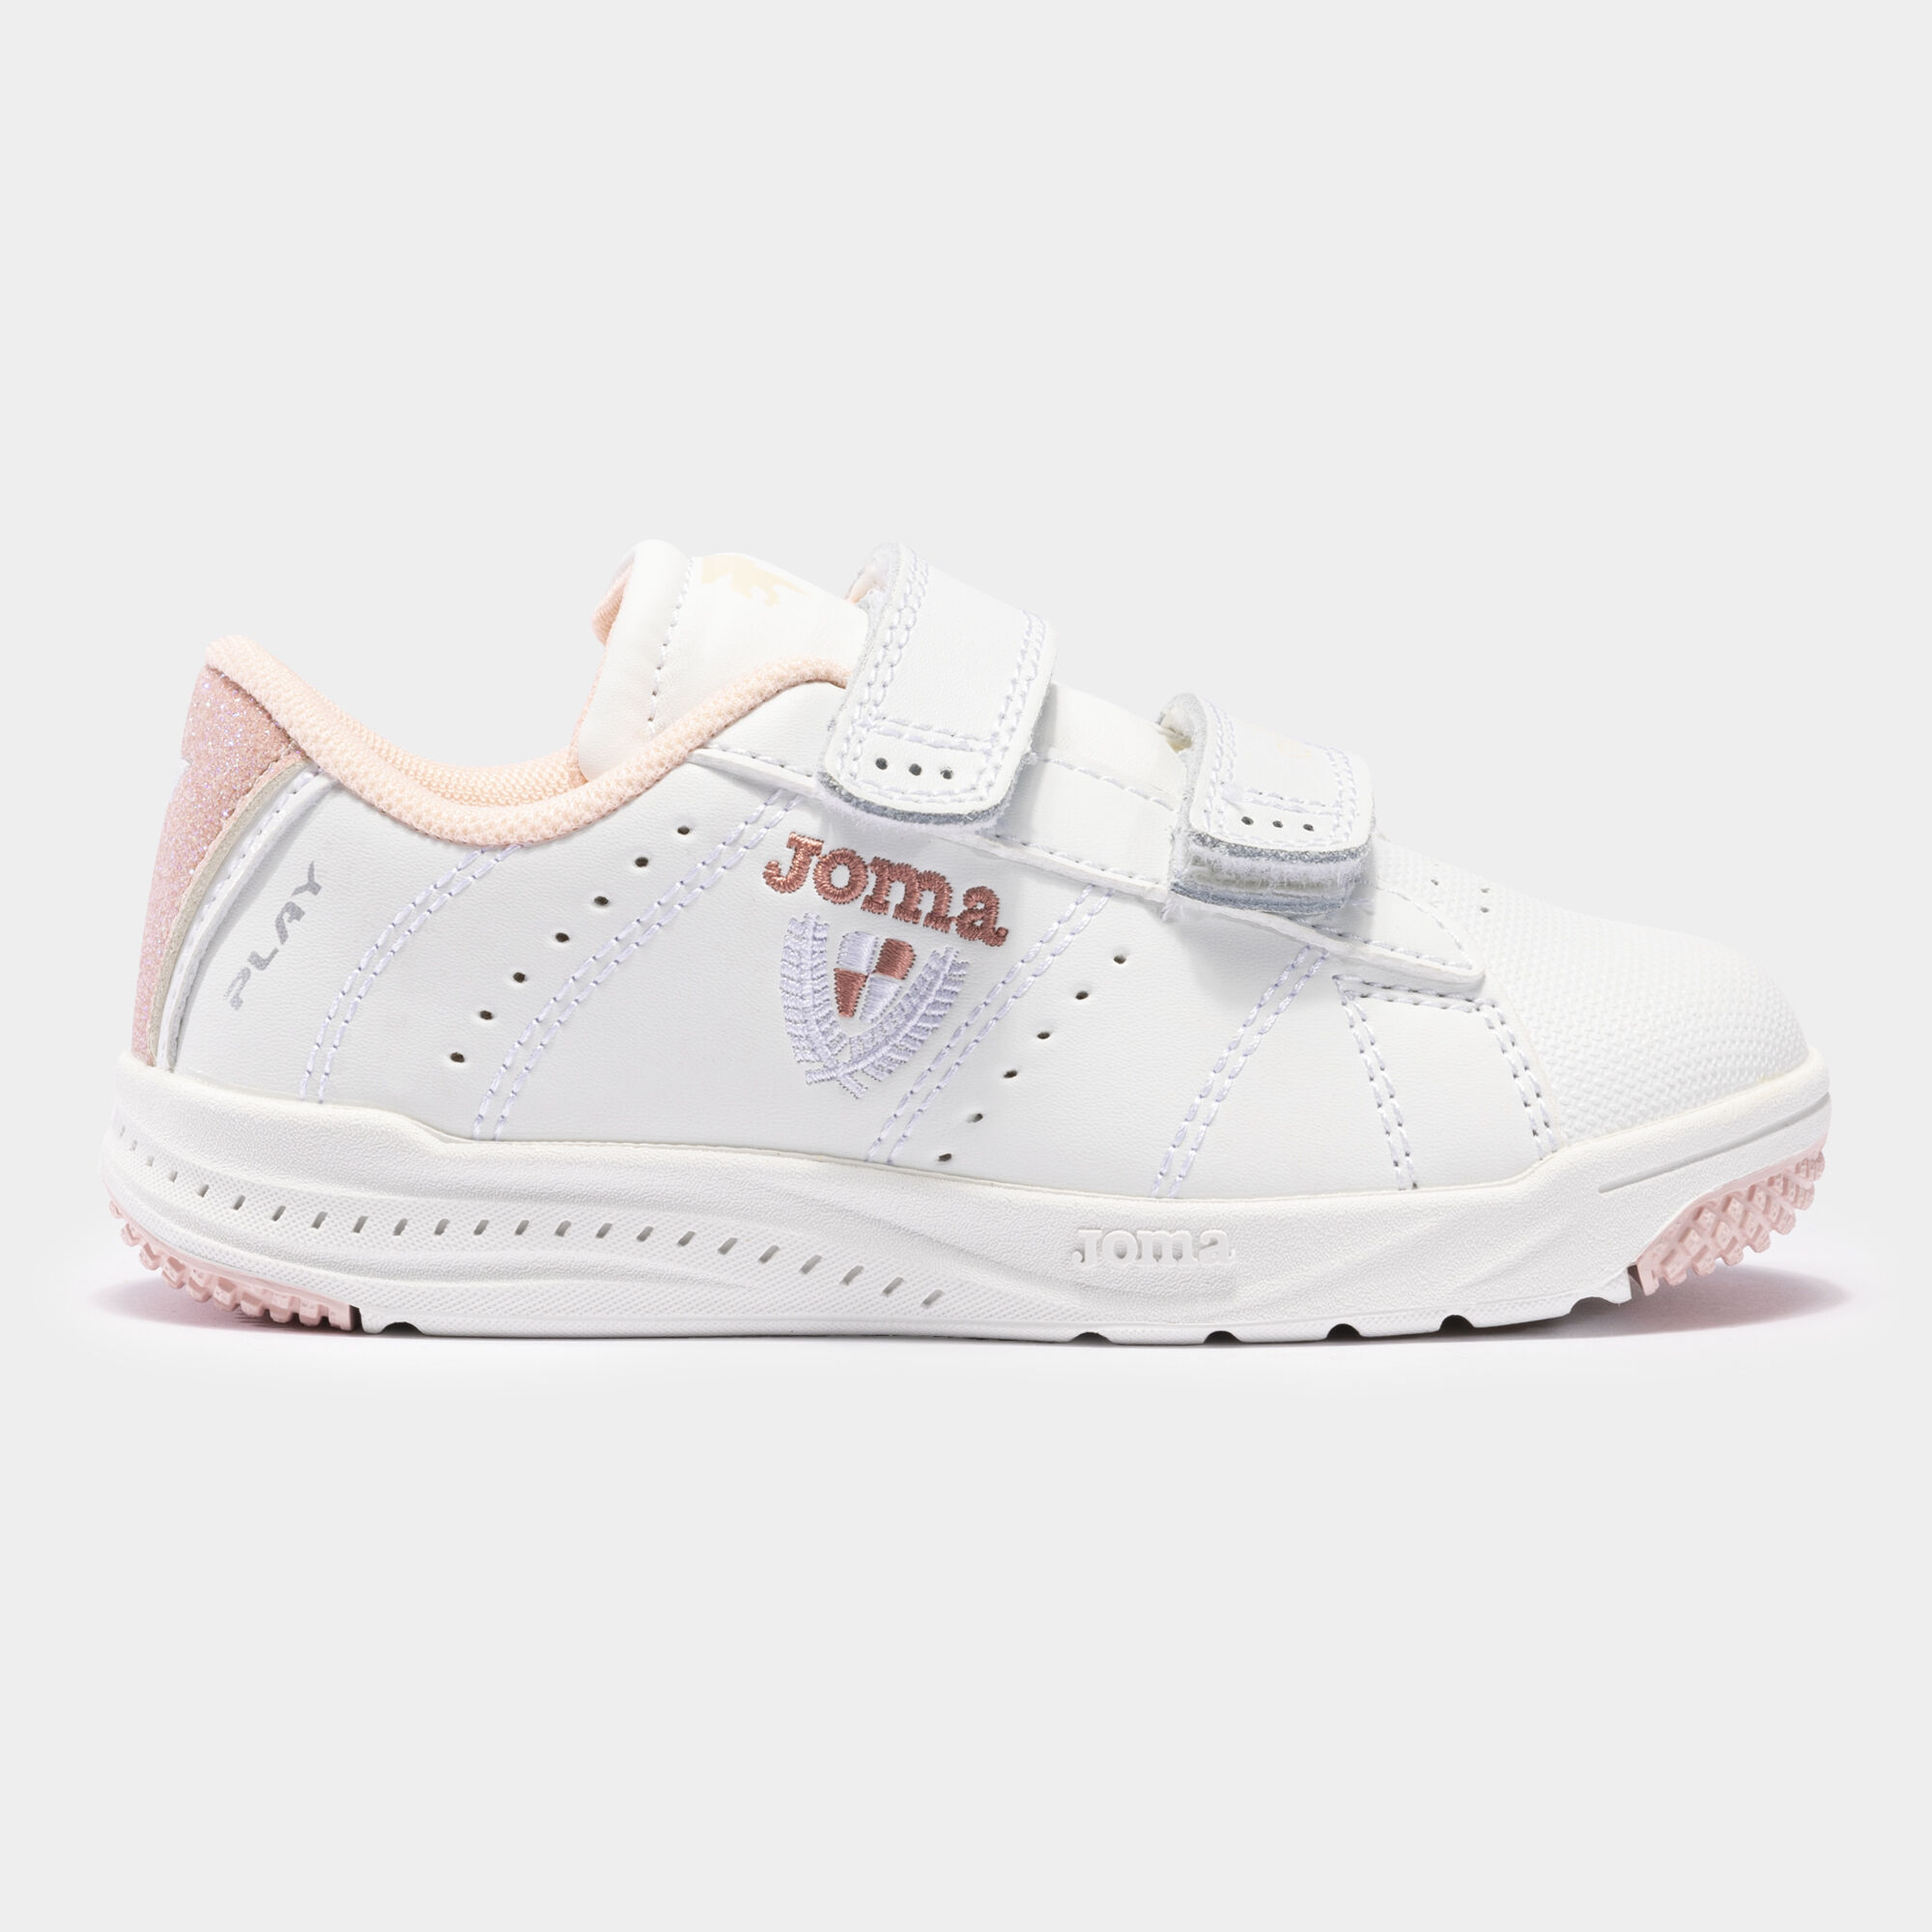 Casual shoes Play 21 junior white pink